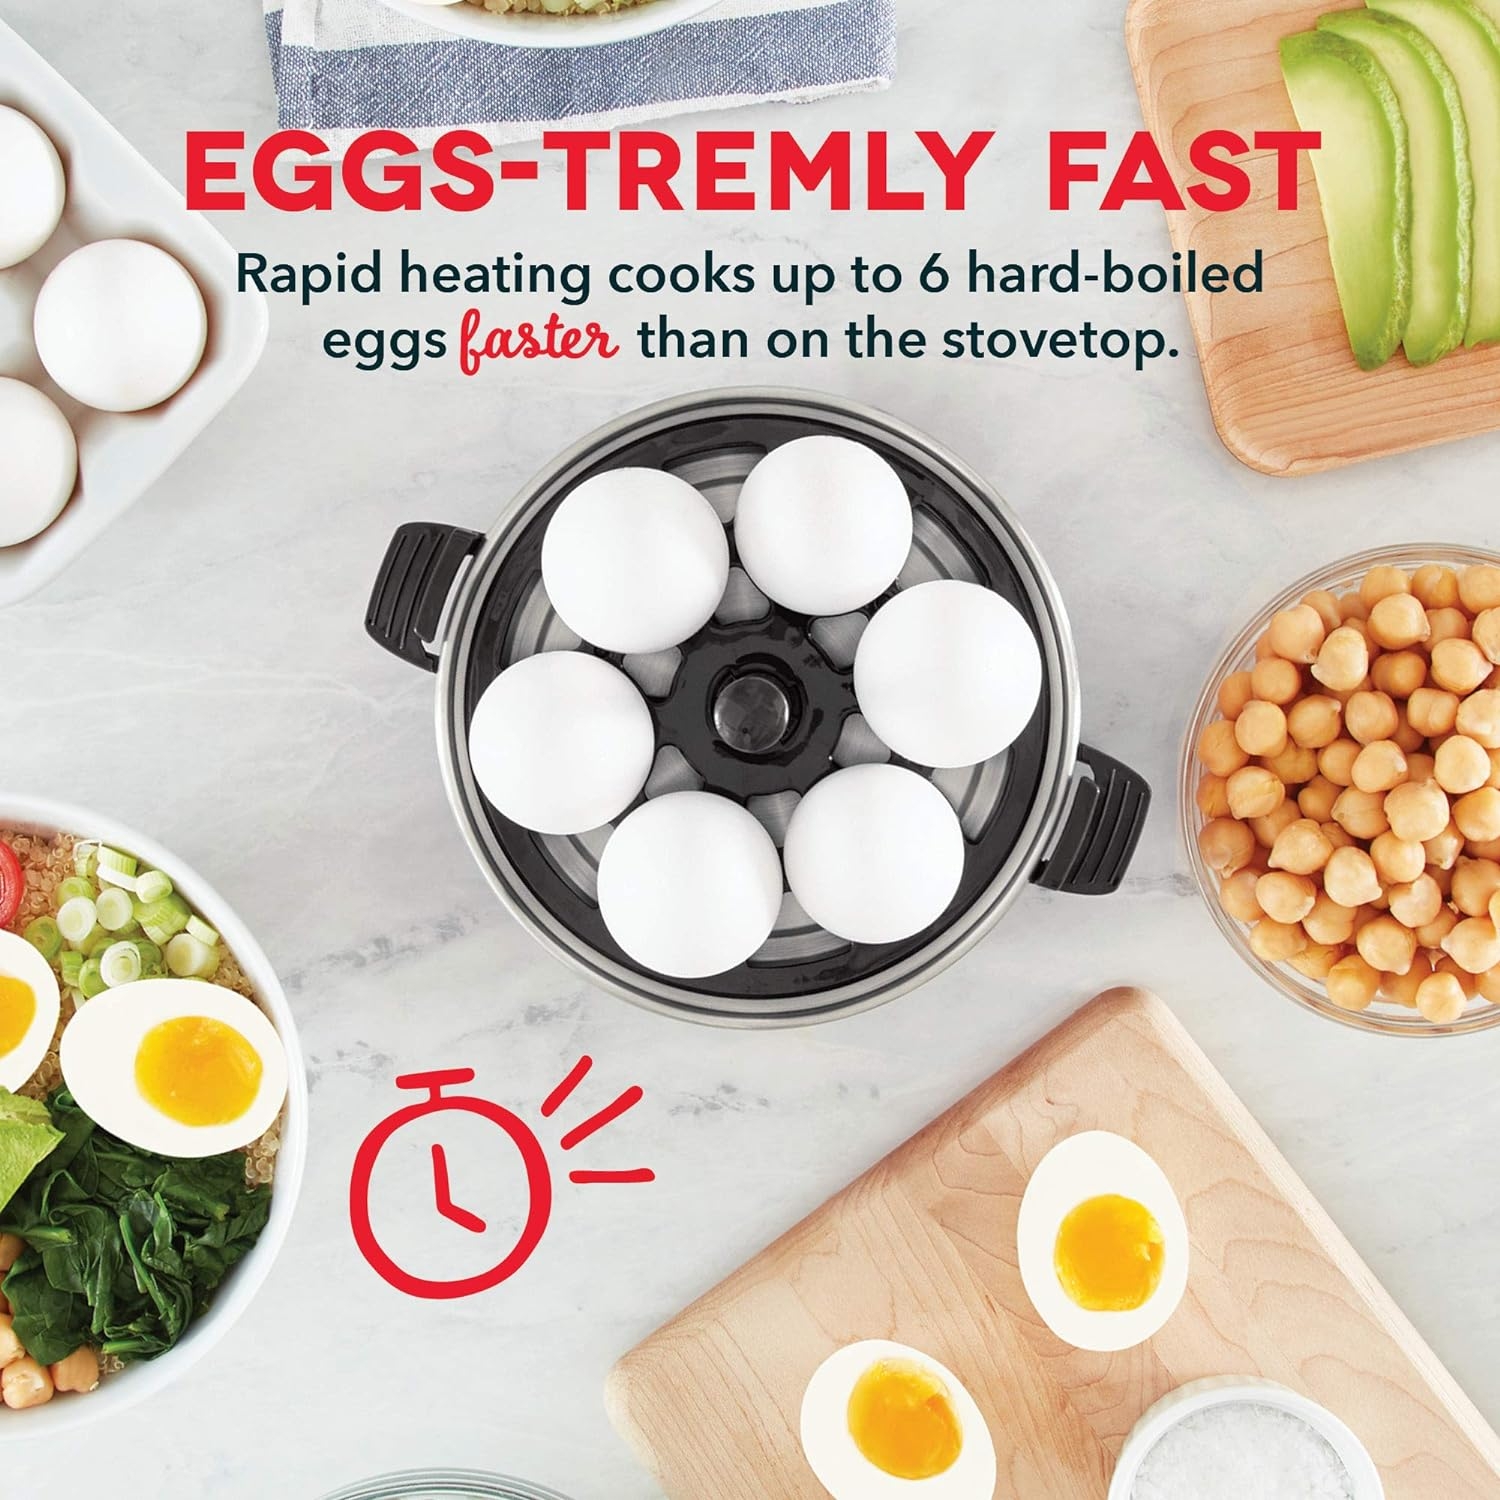 Dash Rapid Egg Cooker: 6 Egg Capacity Electric Egg Cooker for Hard Boiled Eggs, Poached Eggs, Scrambled Eggs, or Omelets with Auto Shut Off Feature - Black